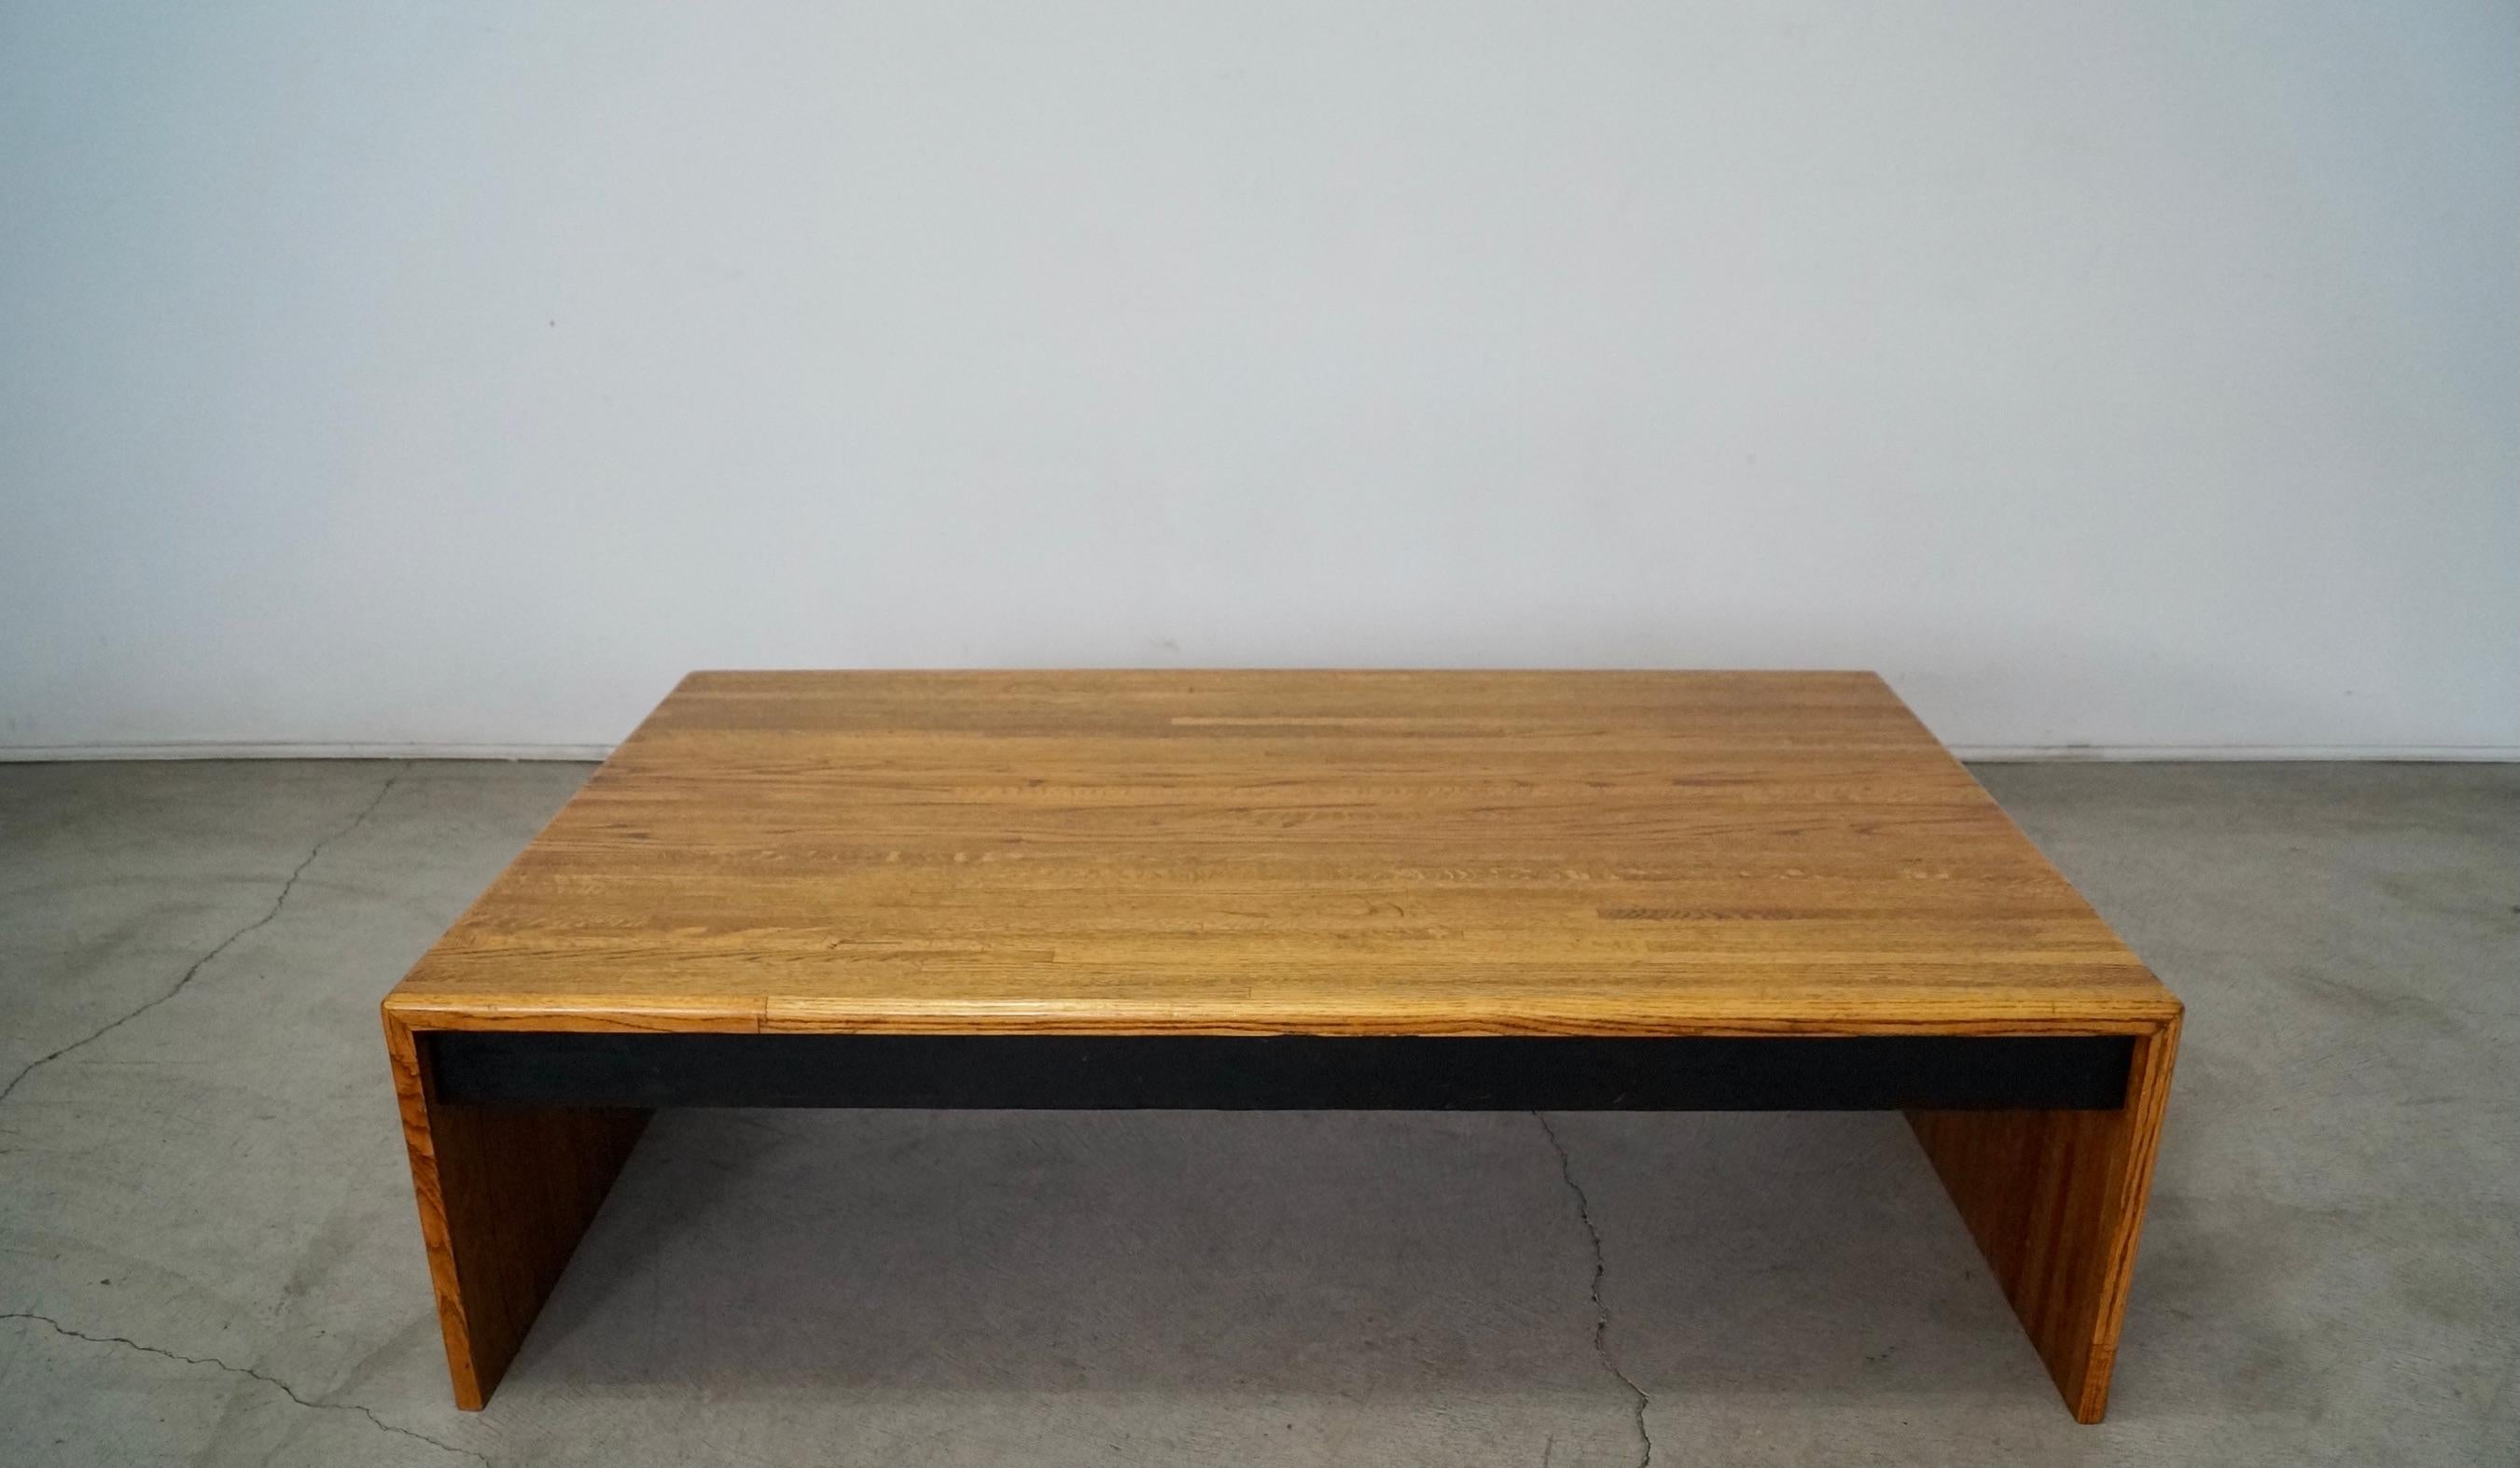 Vintage Mid-century Modern coffee table for sale. From the 1970’s, and in the manner of Lou Hodges designs. Made of solid wood, and has a parquet wood design. It has a clean and modern design with black lacquered wood in the middle. It has a